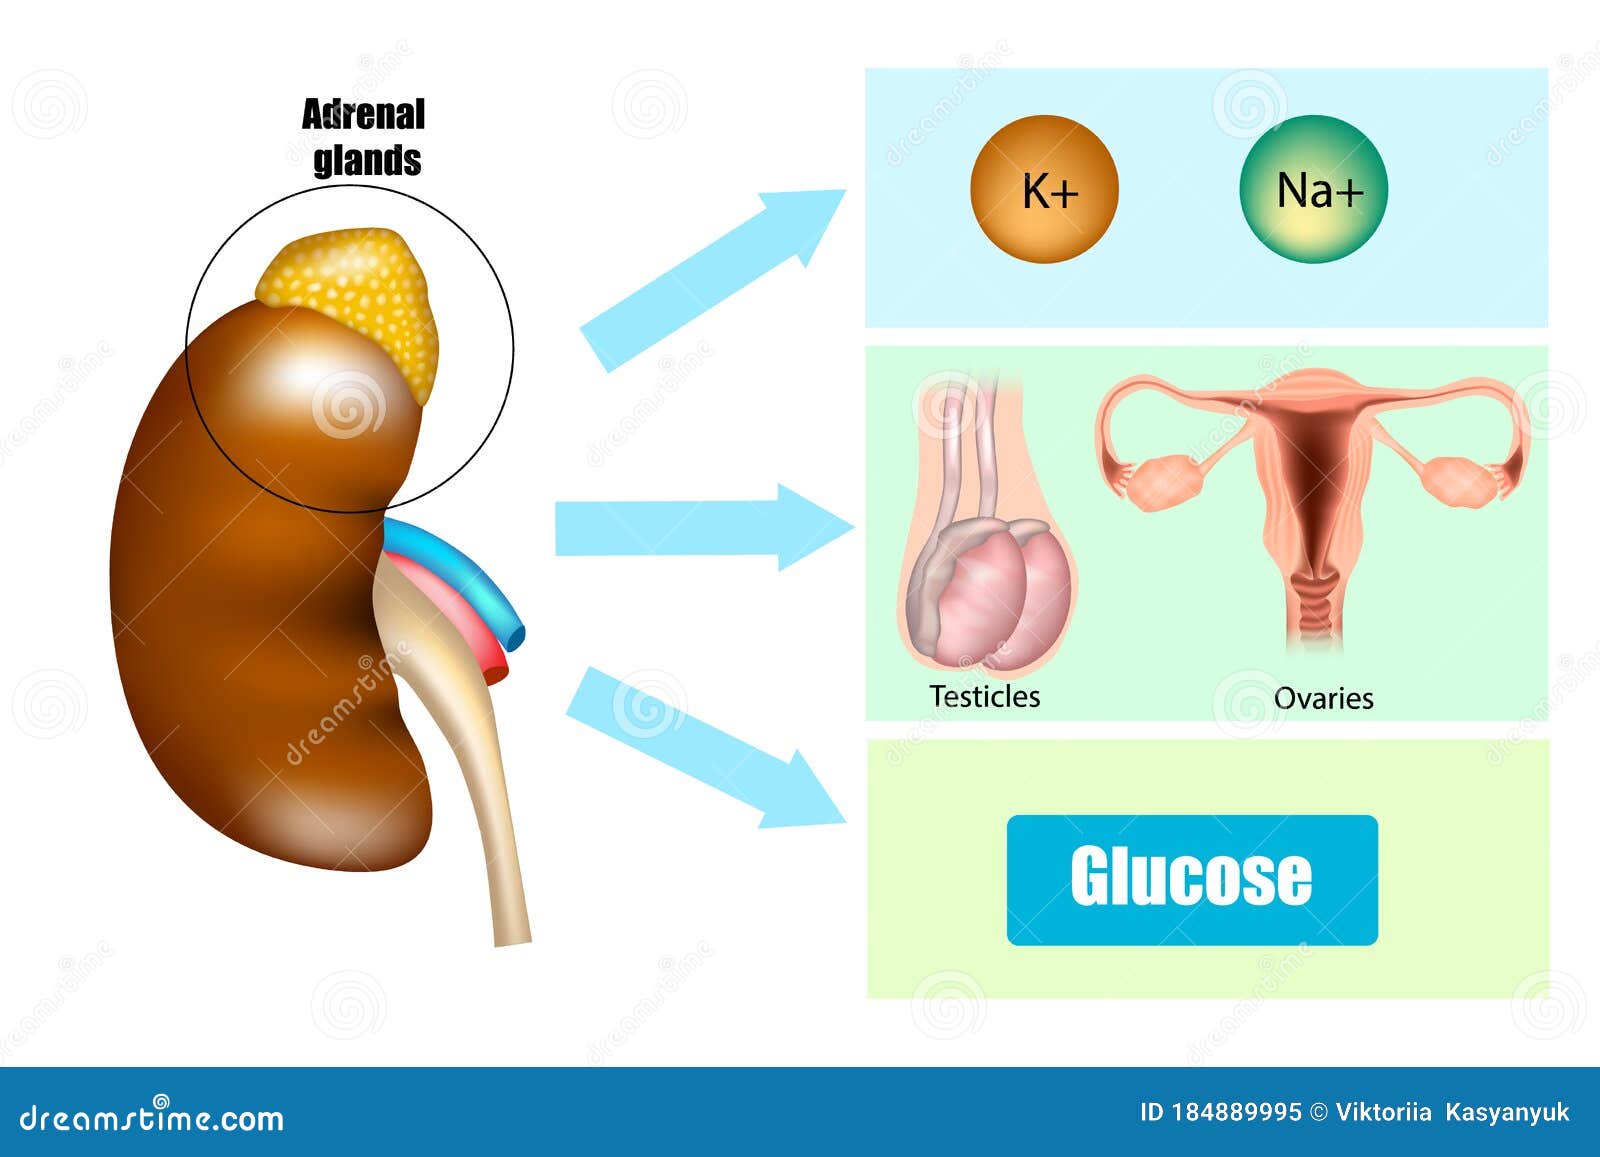 function of adrenal glands in hormone secretion. anatomy and physiology of the adrenal gland.